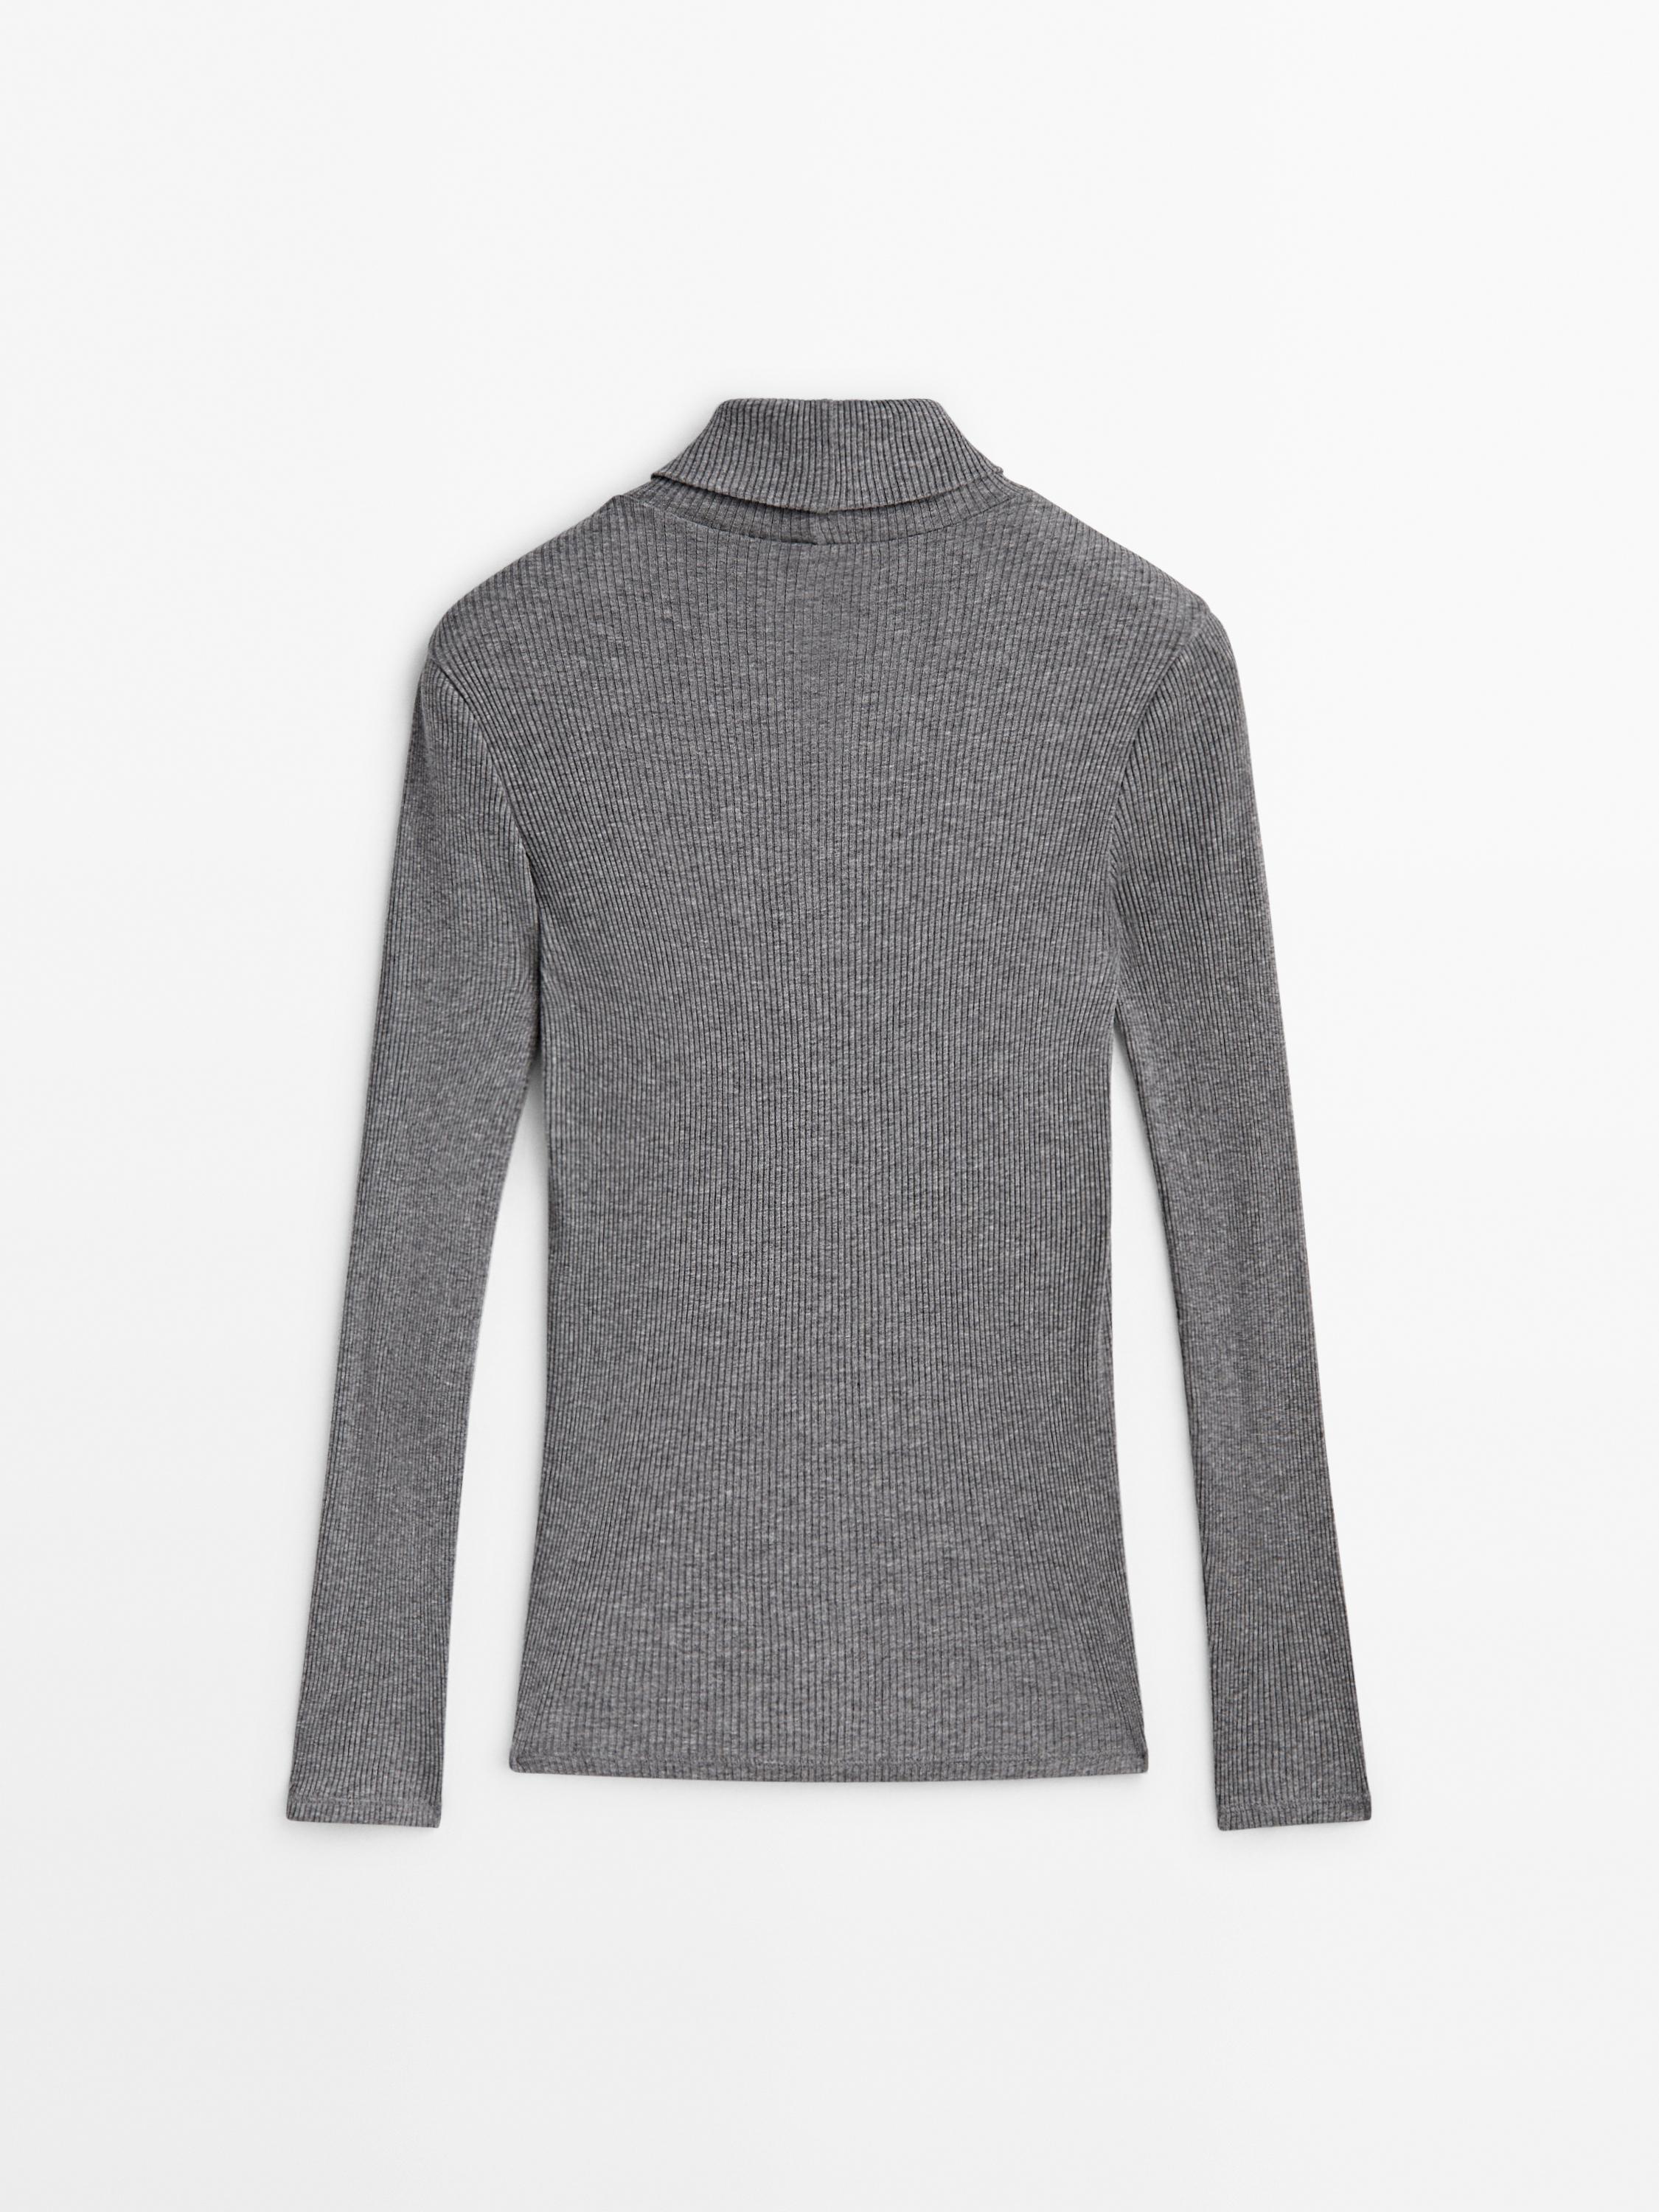 Fitted ribbed high neck top - Gray marl | ZARA United States